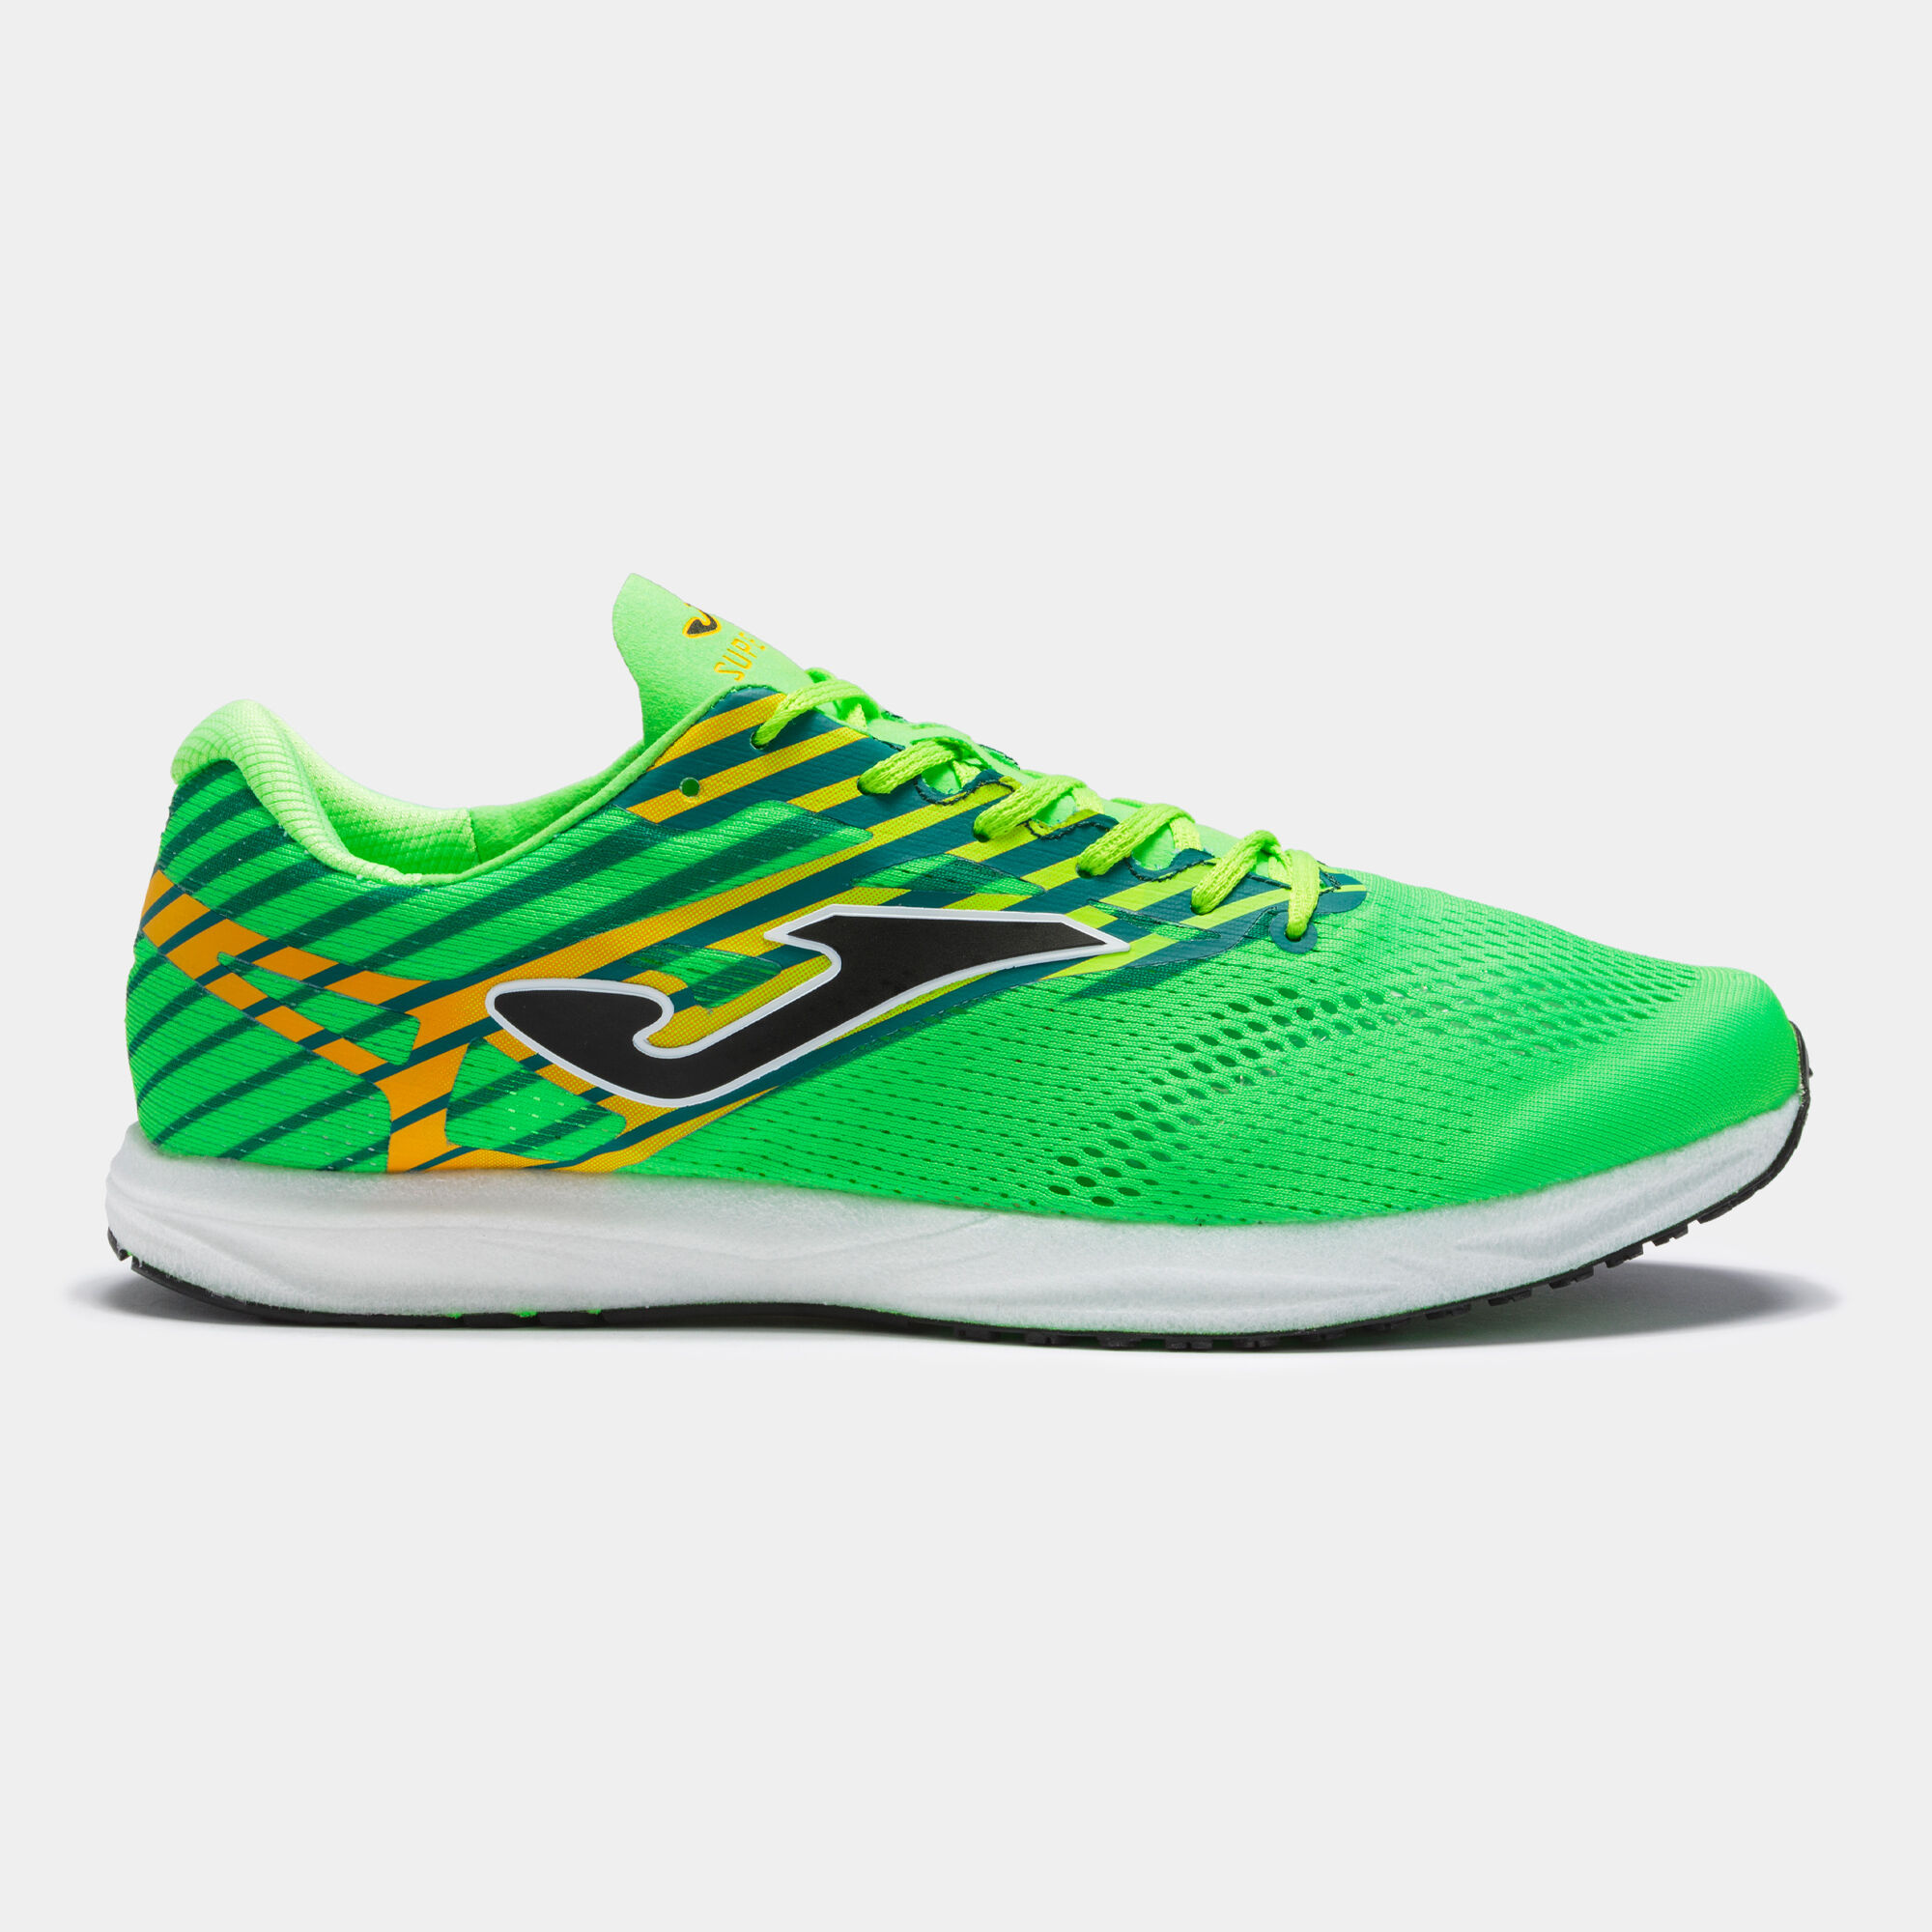 RUNNING SHOES R.5000 20 WOMAN FLUORESCENT YELLOW